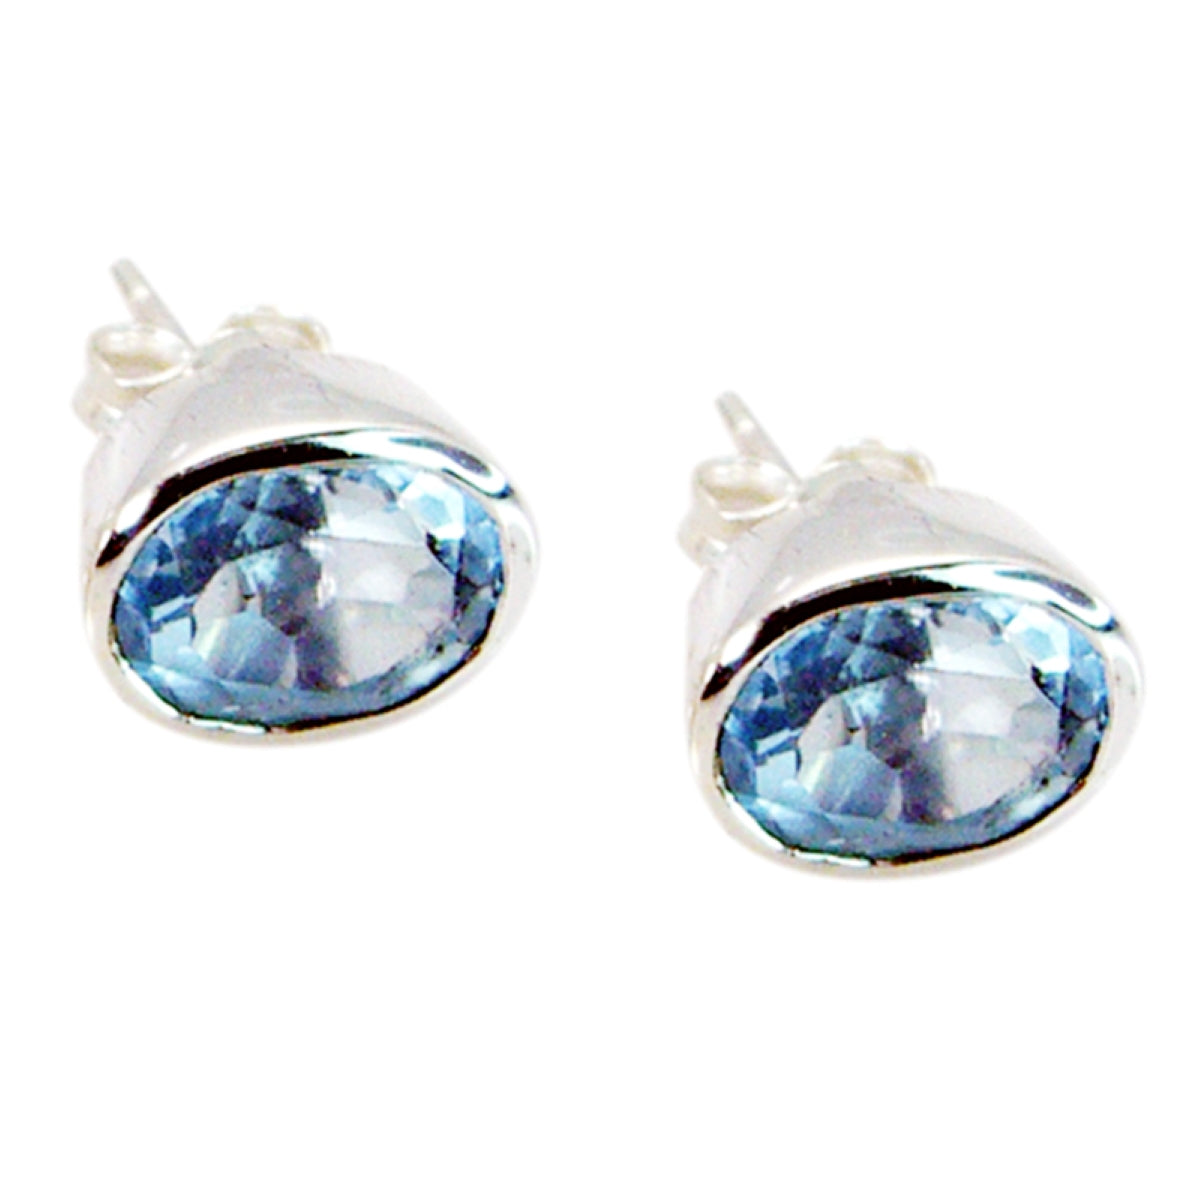 Riyo Nice Gemstone oval Faceted Blue Topaz Silver Earrings gift for cyber Monday